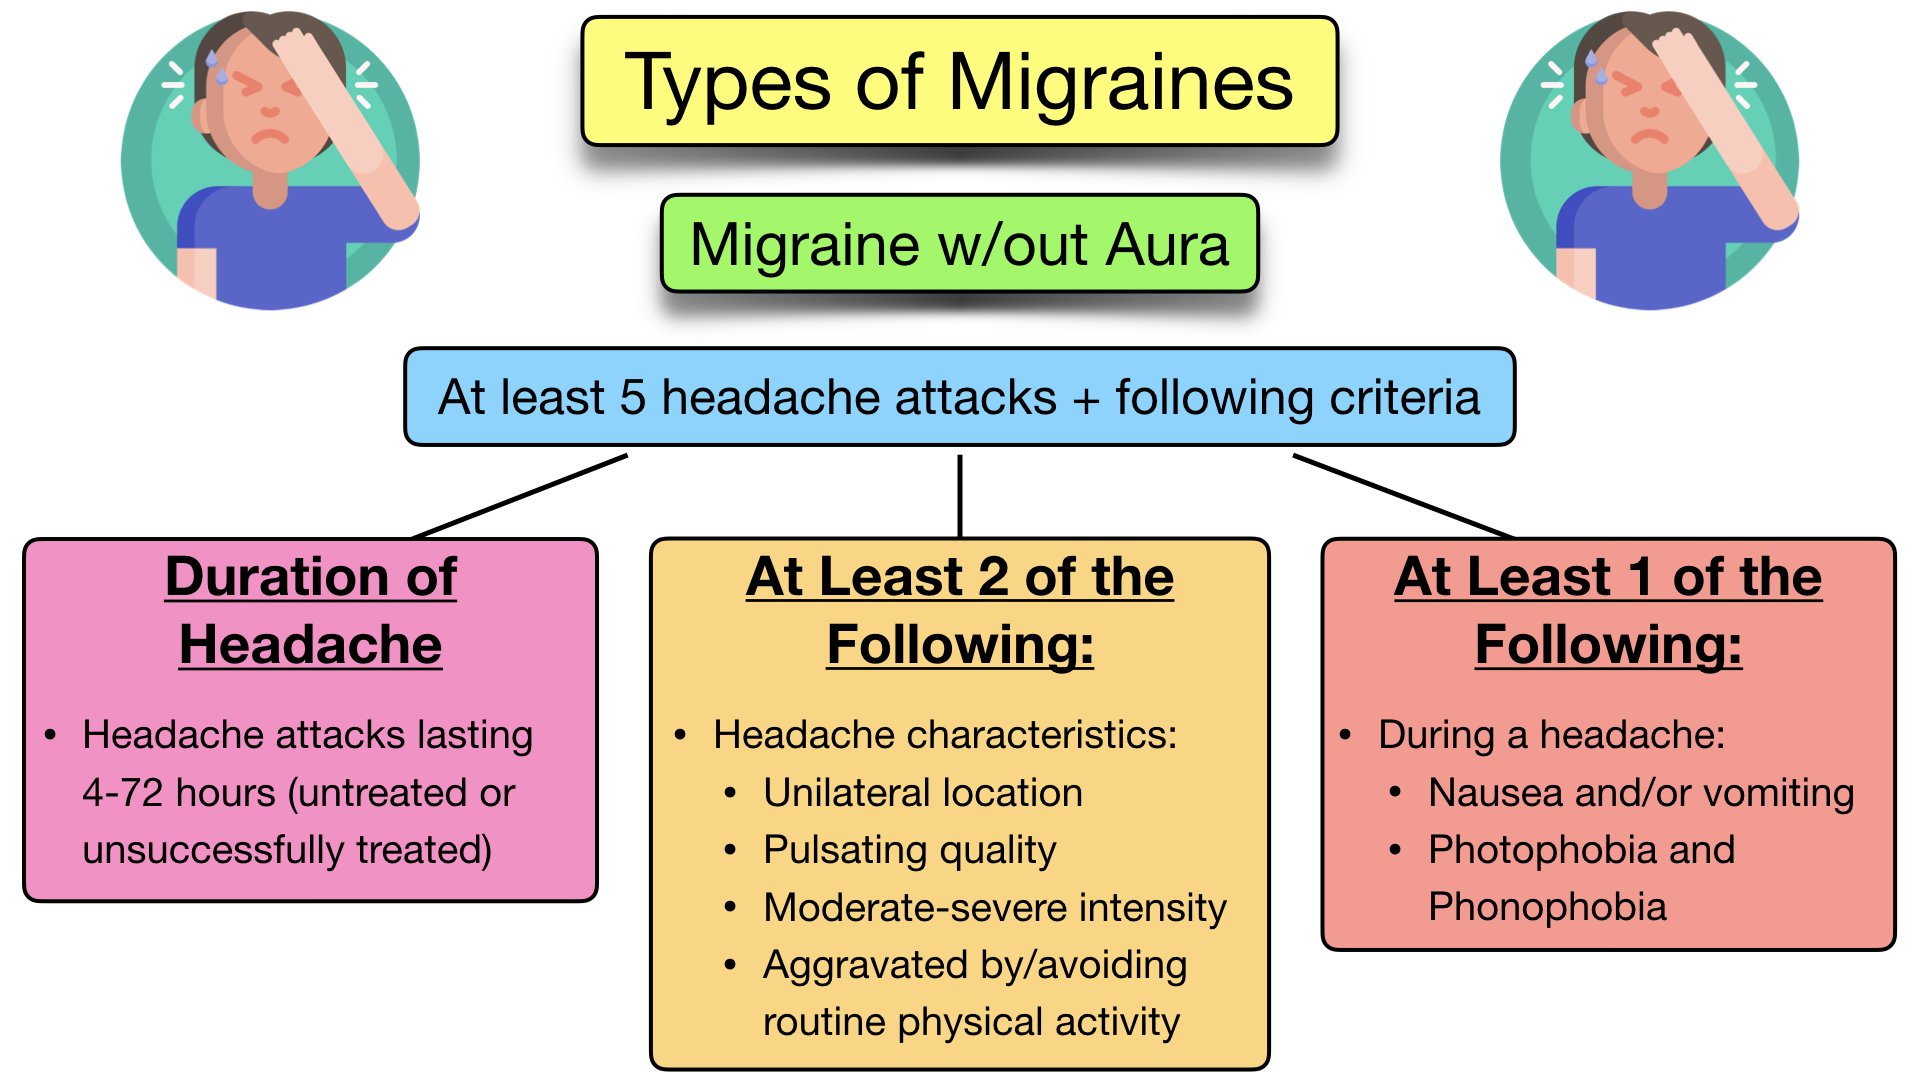 Migraine vs. Headache: What's the Difference? - GoodRx